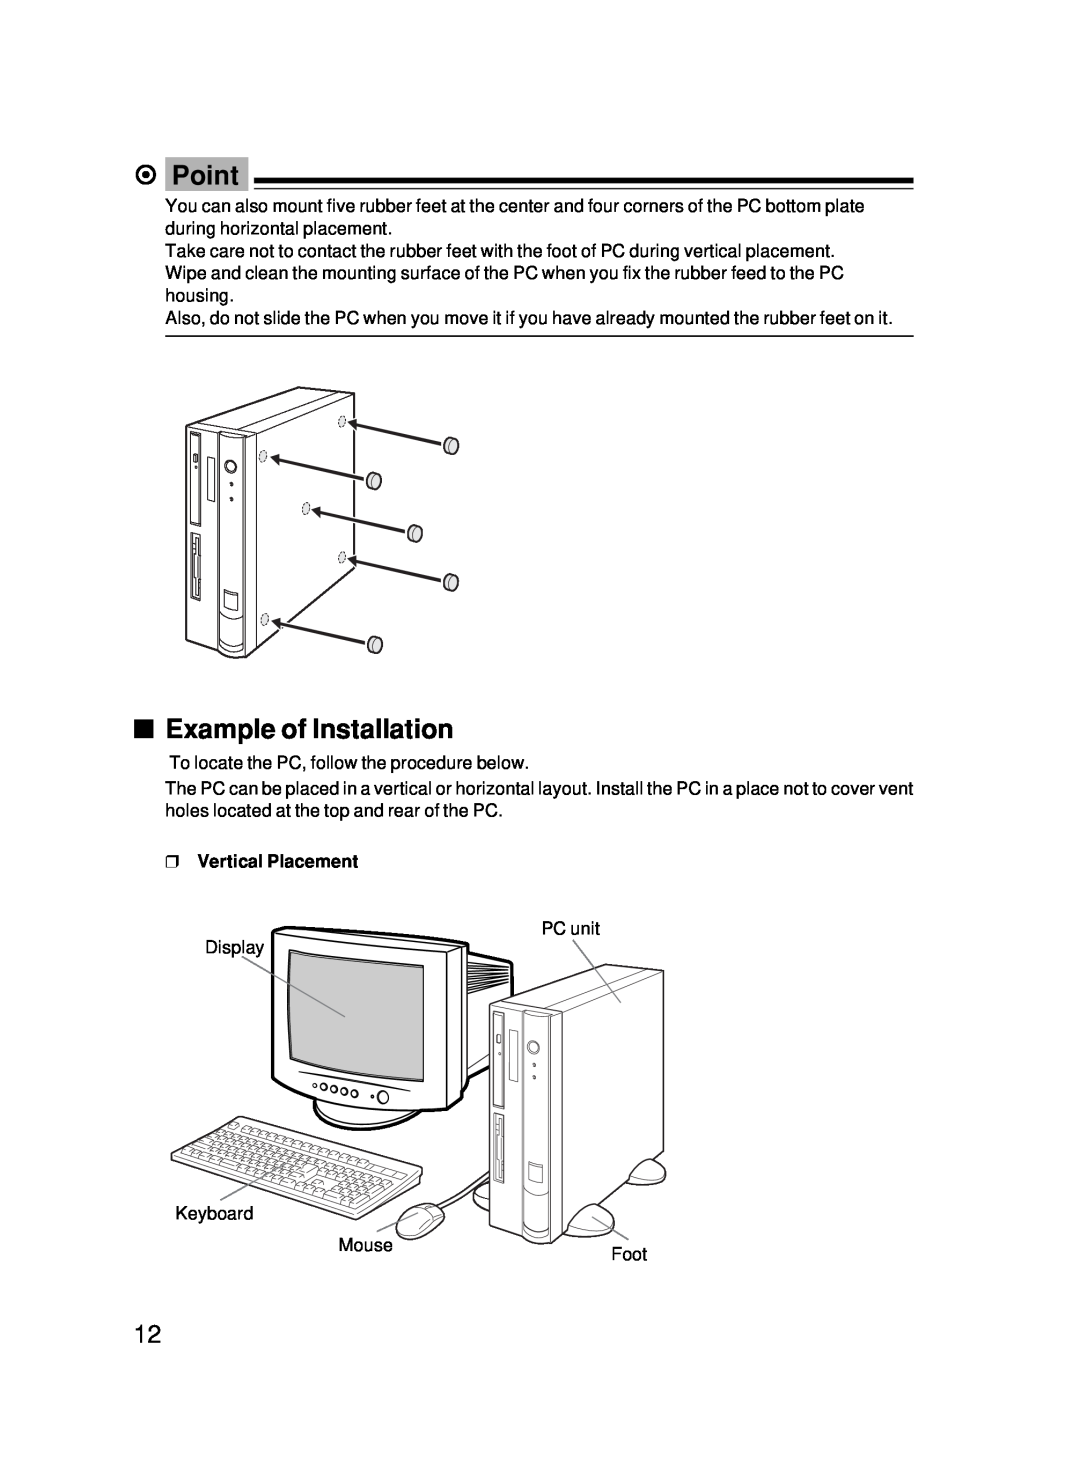 Fujitsu 5000 user manual Example of Installation, Point, To locate the PC, follow the procedure below, Vertical Placement 